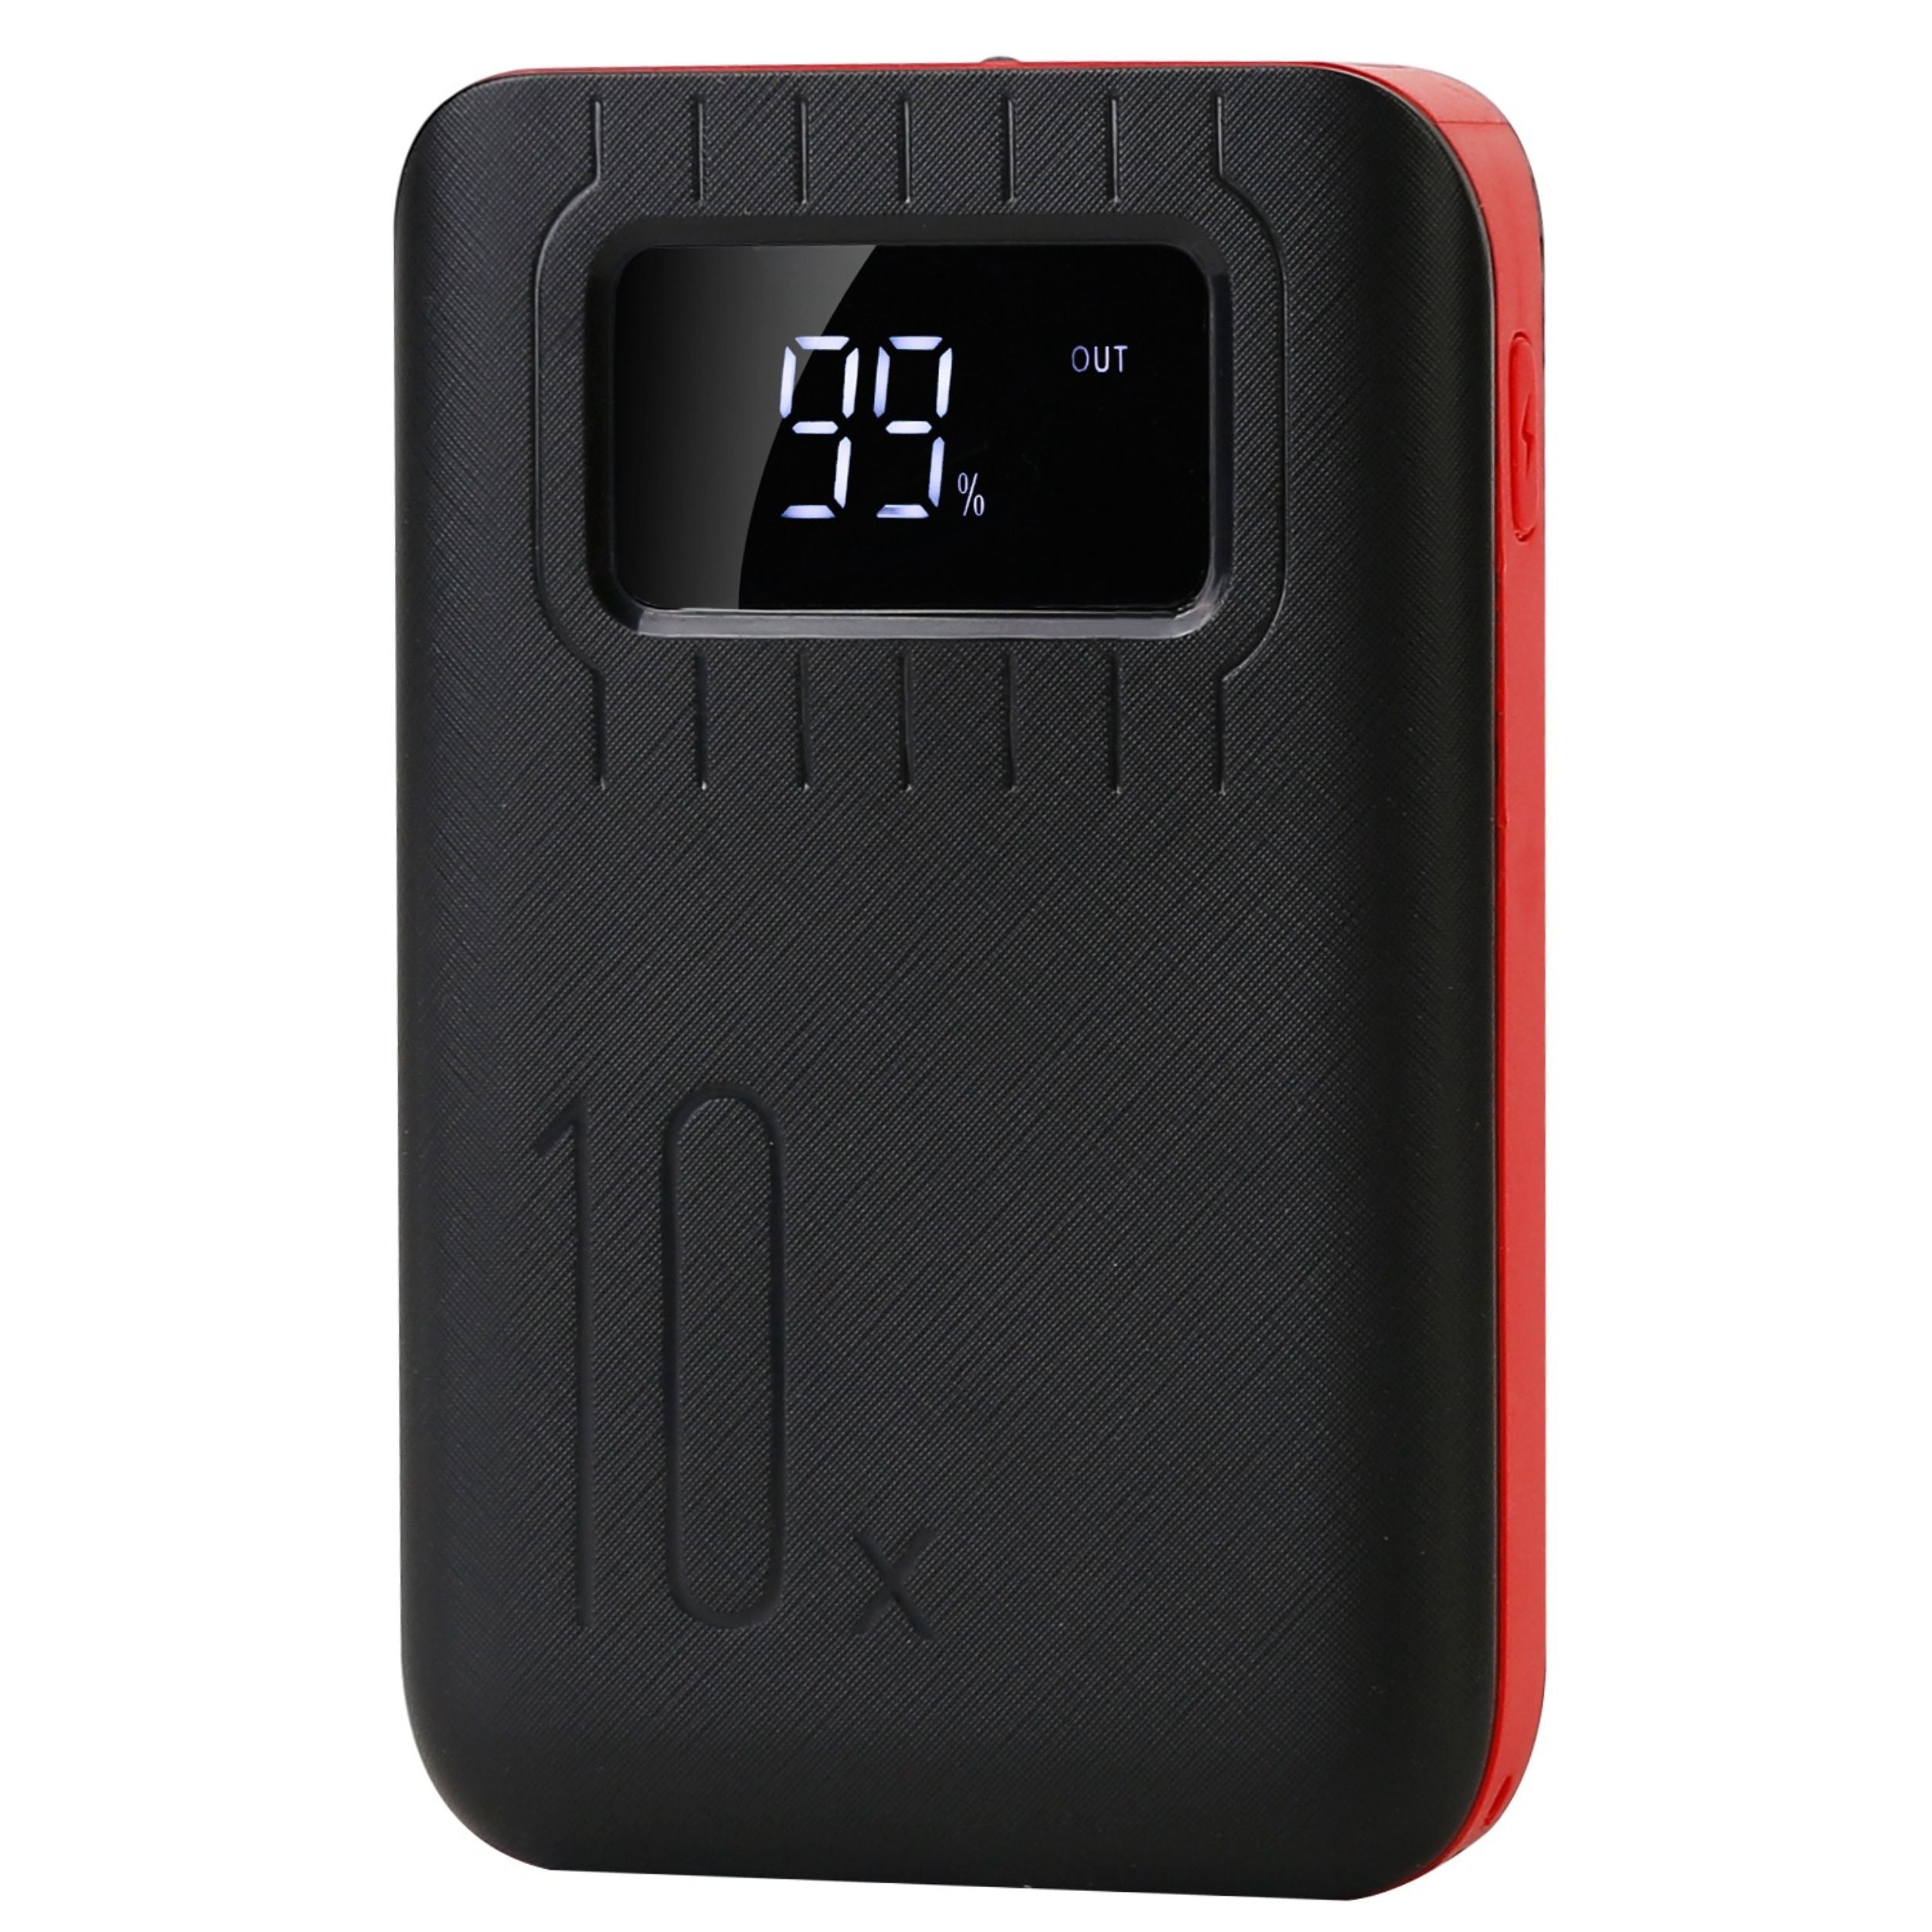 title:10,000mAh Power Bank Charger with Dual USB Ports, LCD Display & Flashlight;color:Red